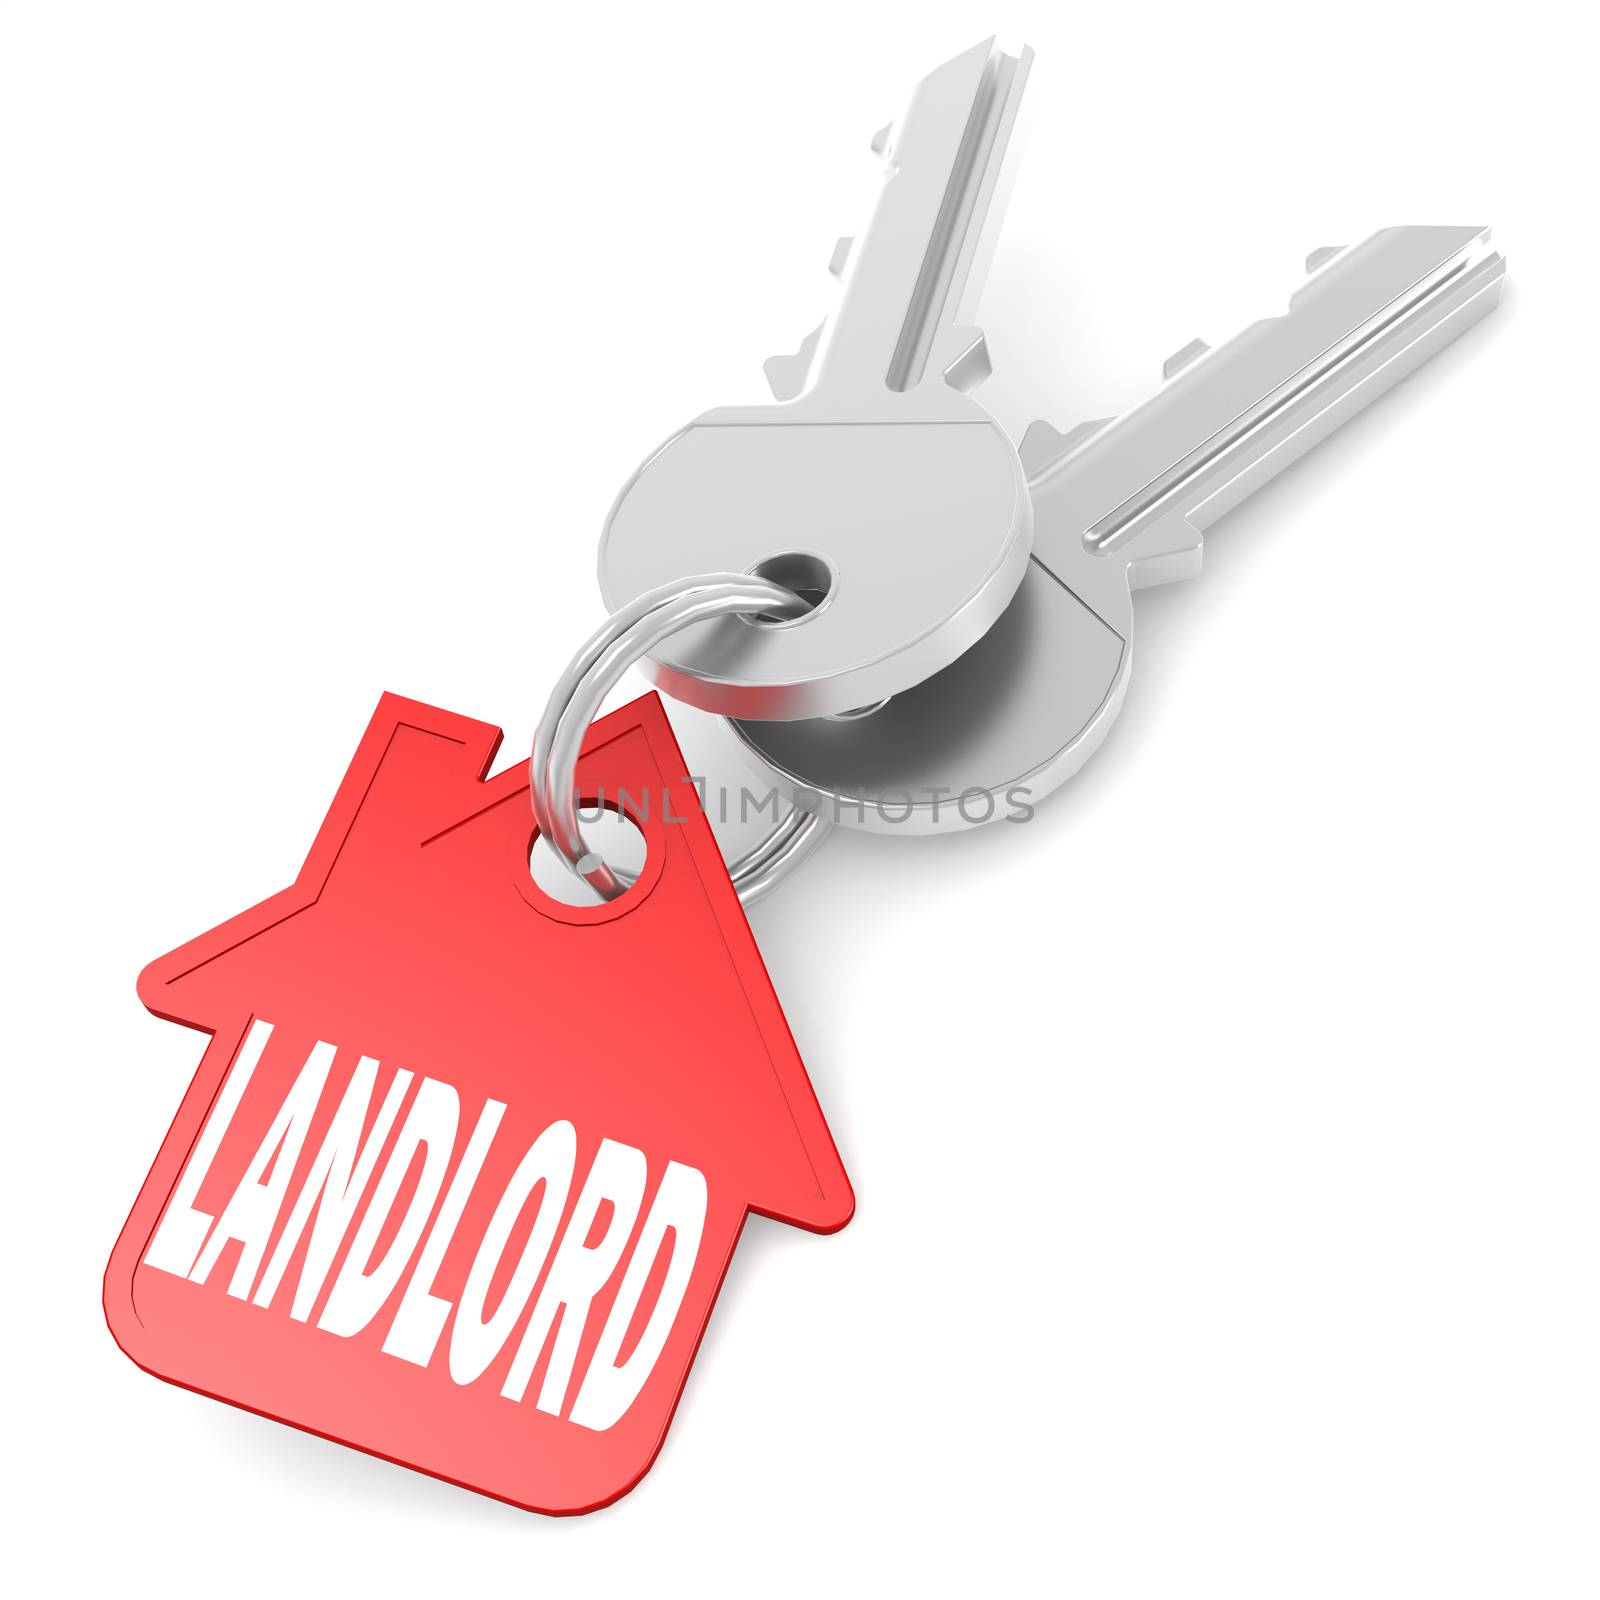 Keychain with landlord word image with hi-res rendered artwork that could be used for any graphic design.